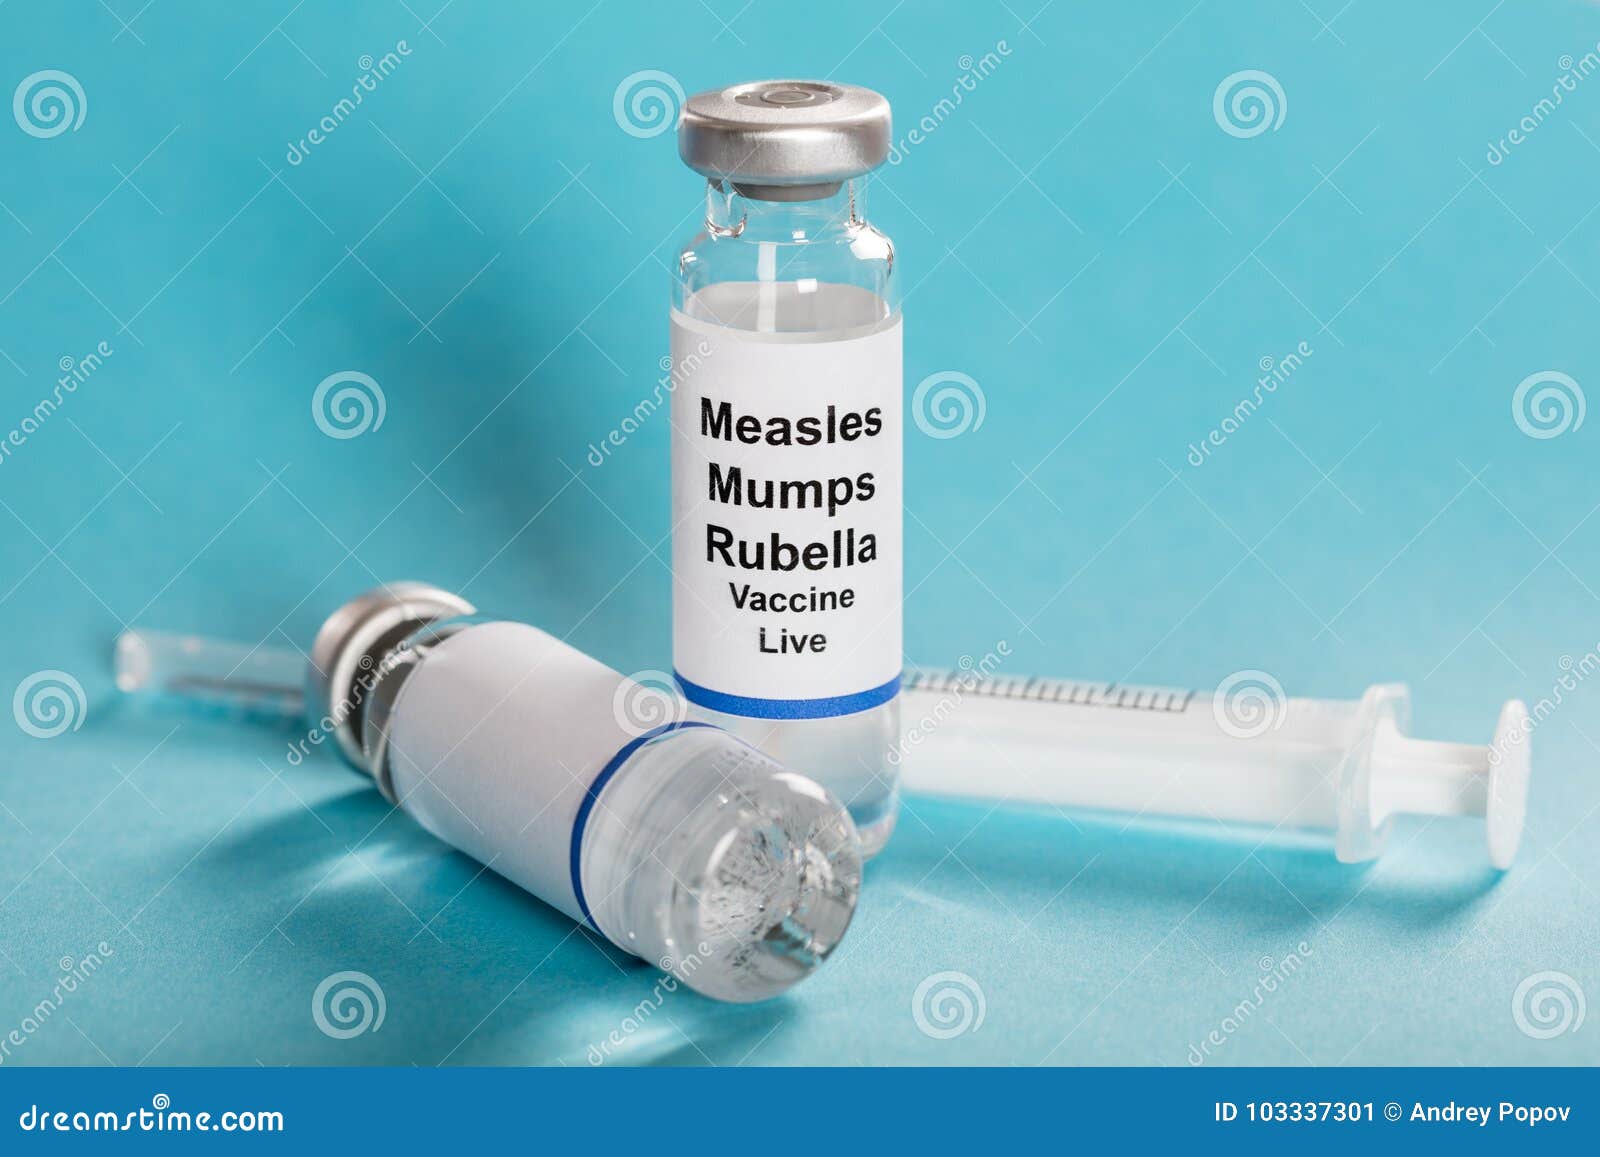 measles mumps rubella vaccine vials with syringe